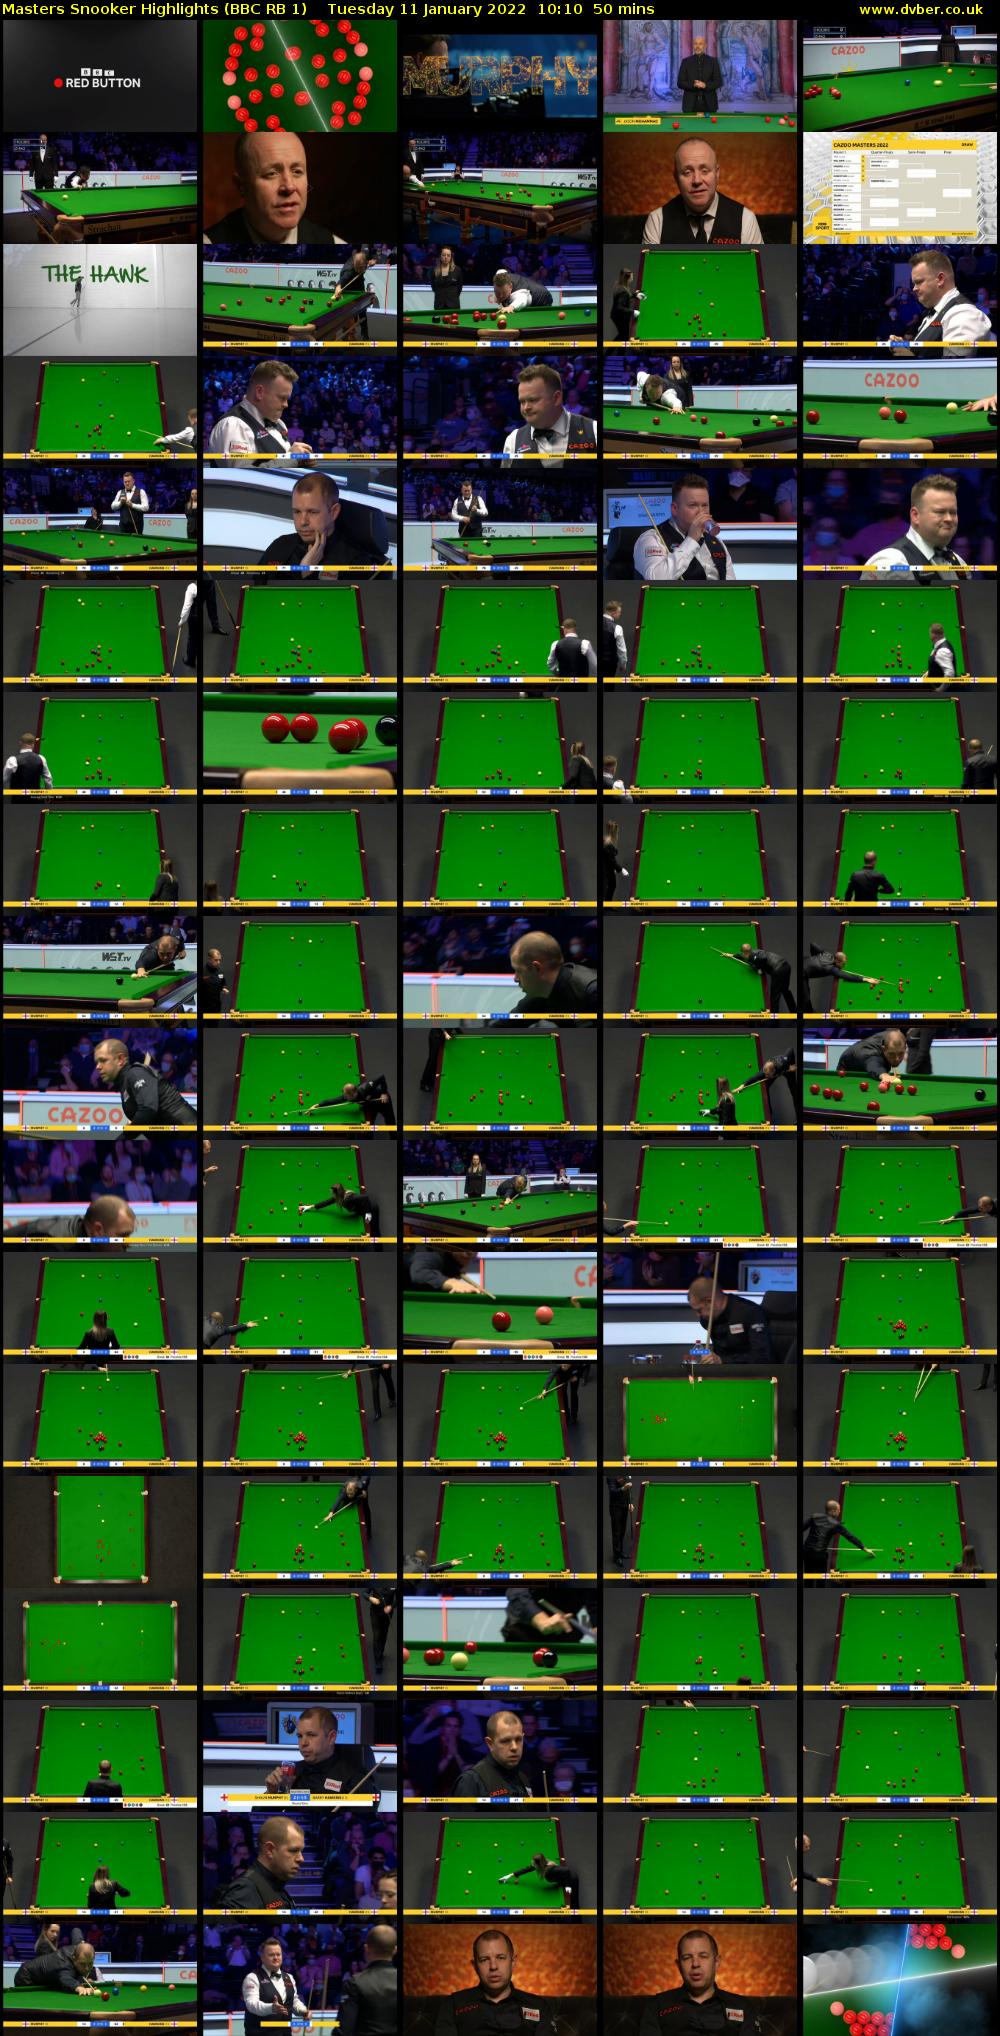 Masters Snooker Highlights (BBC RB 1) Tuesday 11 January 2022 10:10 - 11:00